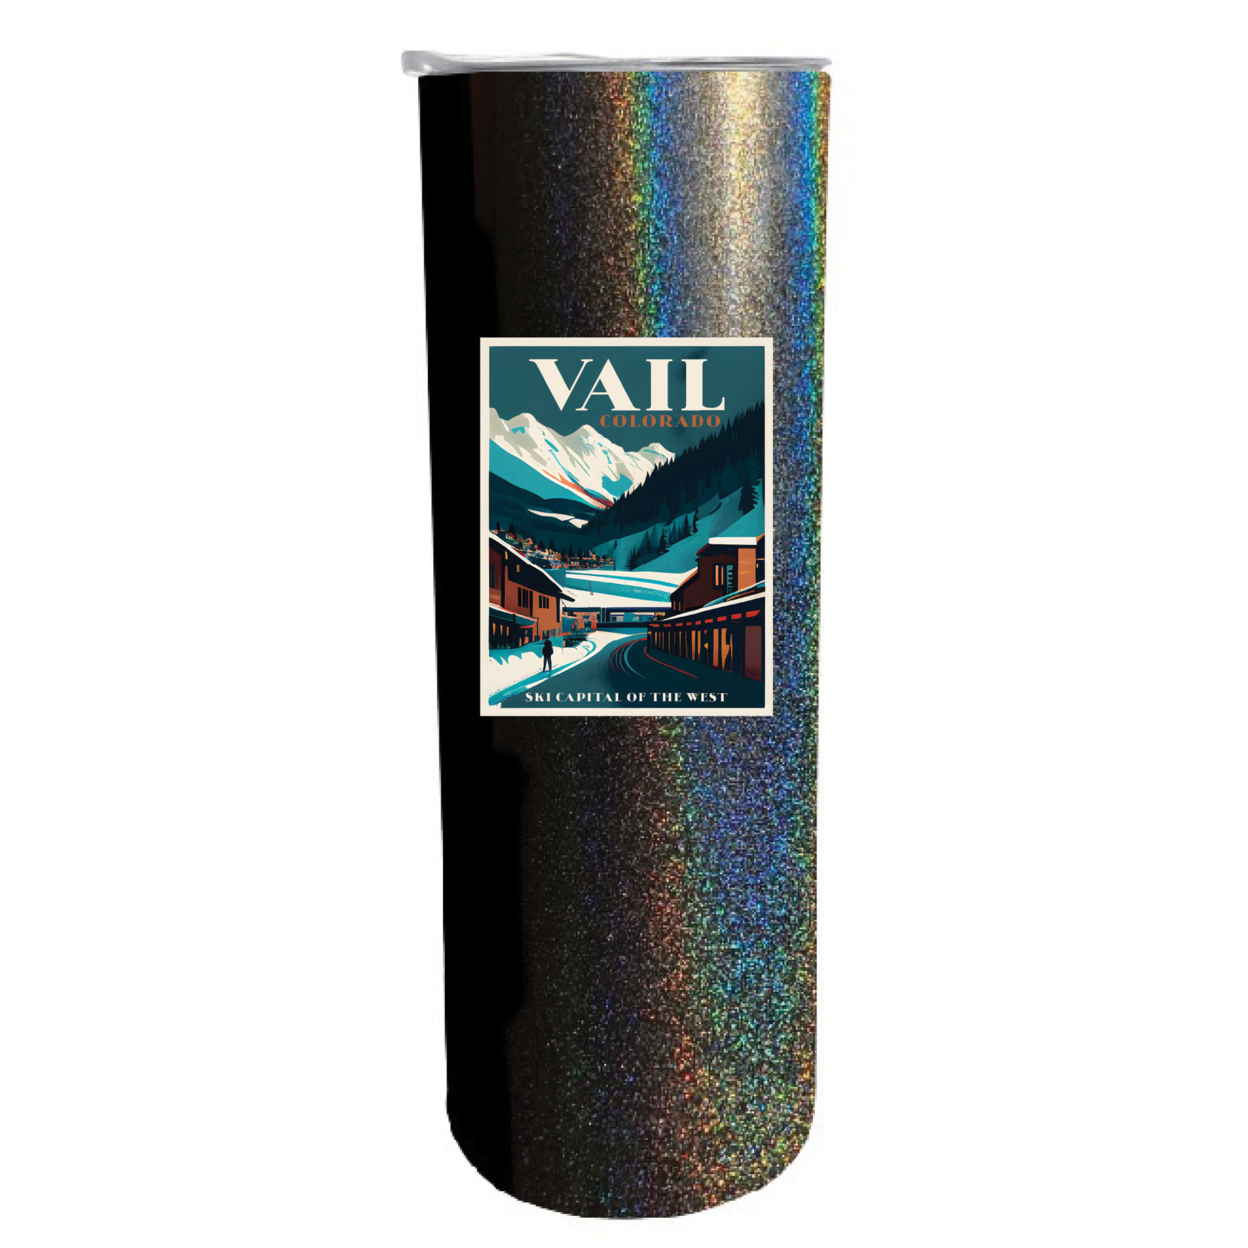 Vail Colorado Souvenir 20 Oz Insulated Stainless Steel Skinny Tumbler - Navy